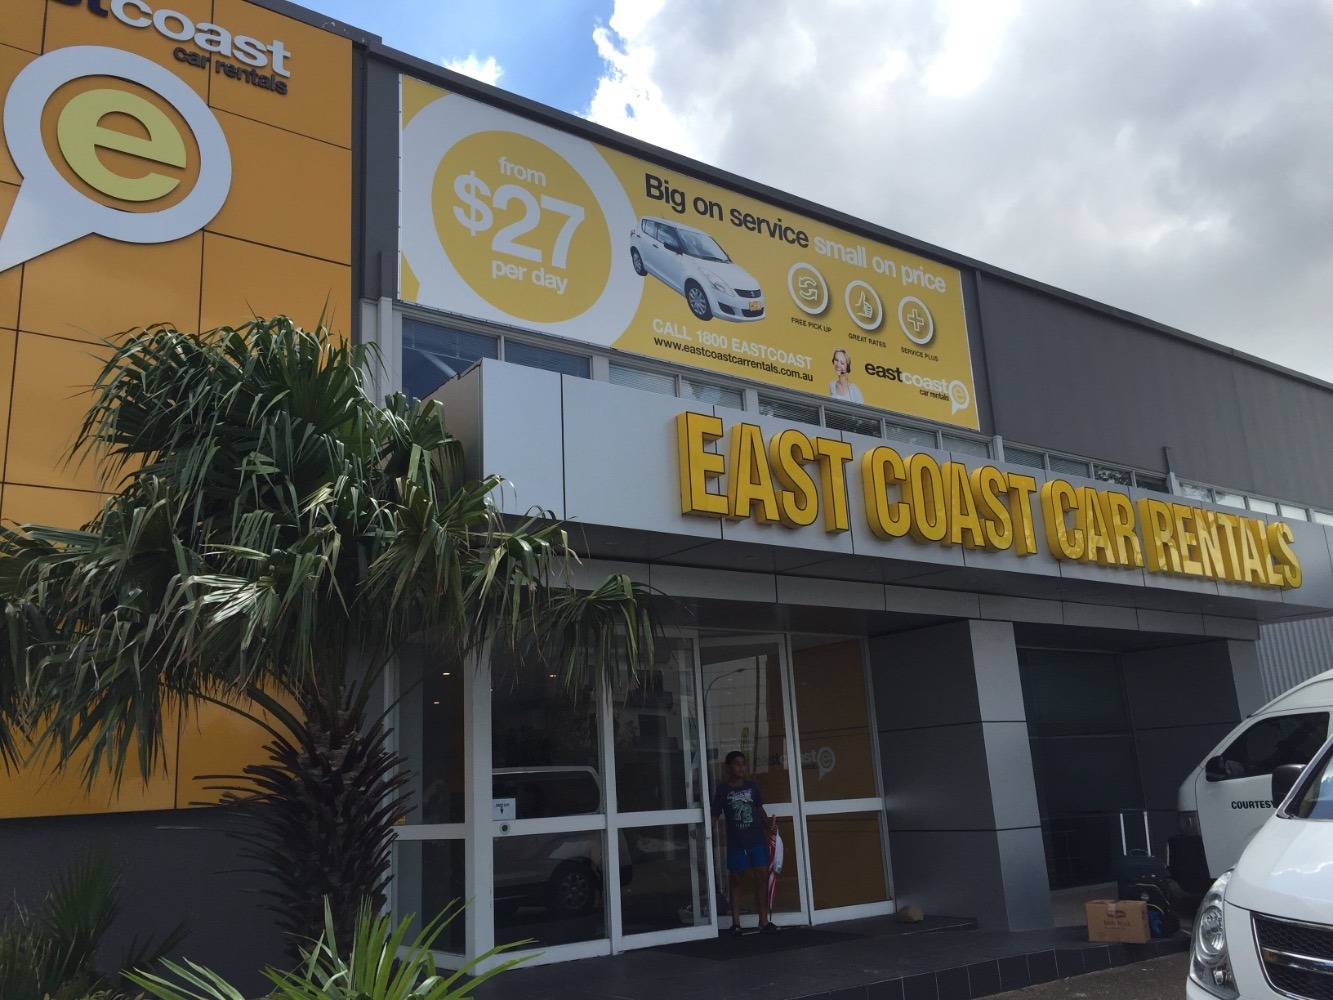 East Coast-Melbourne Airport-29883-store